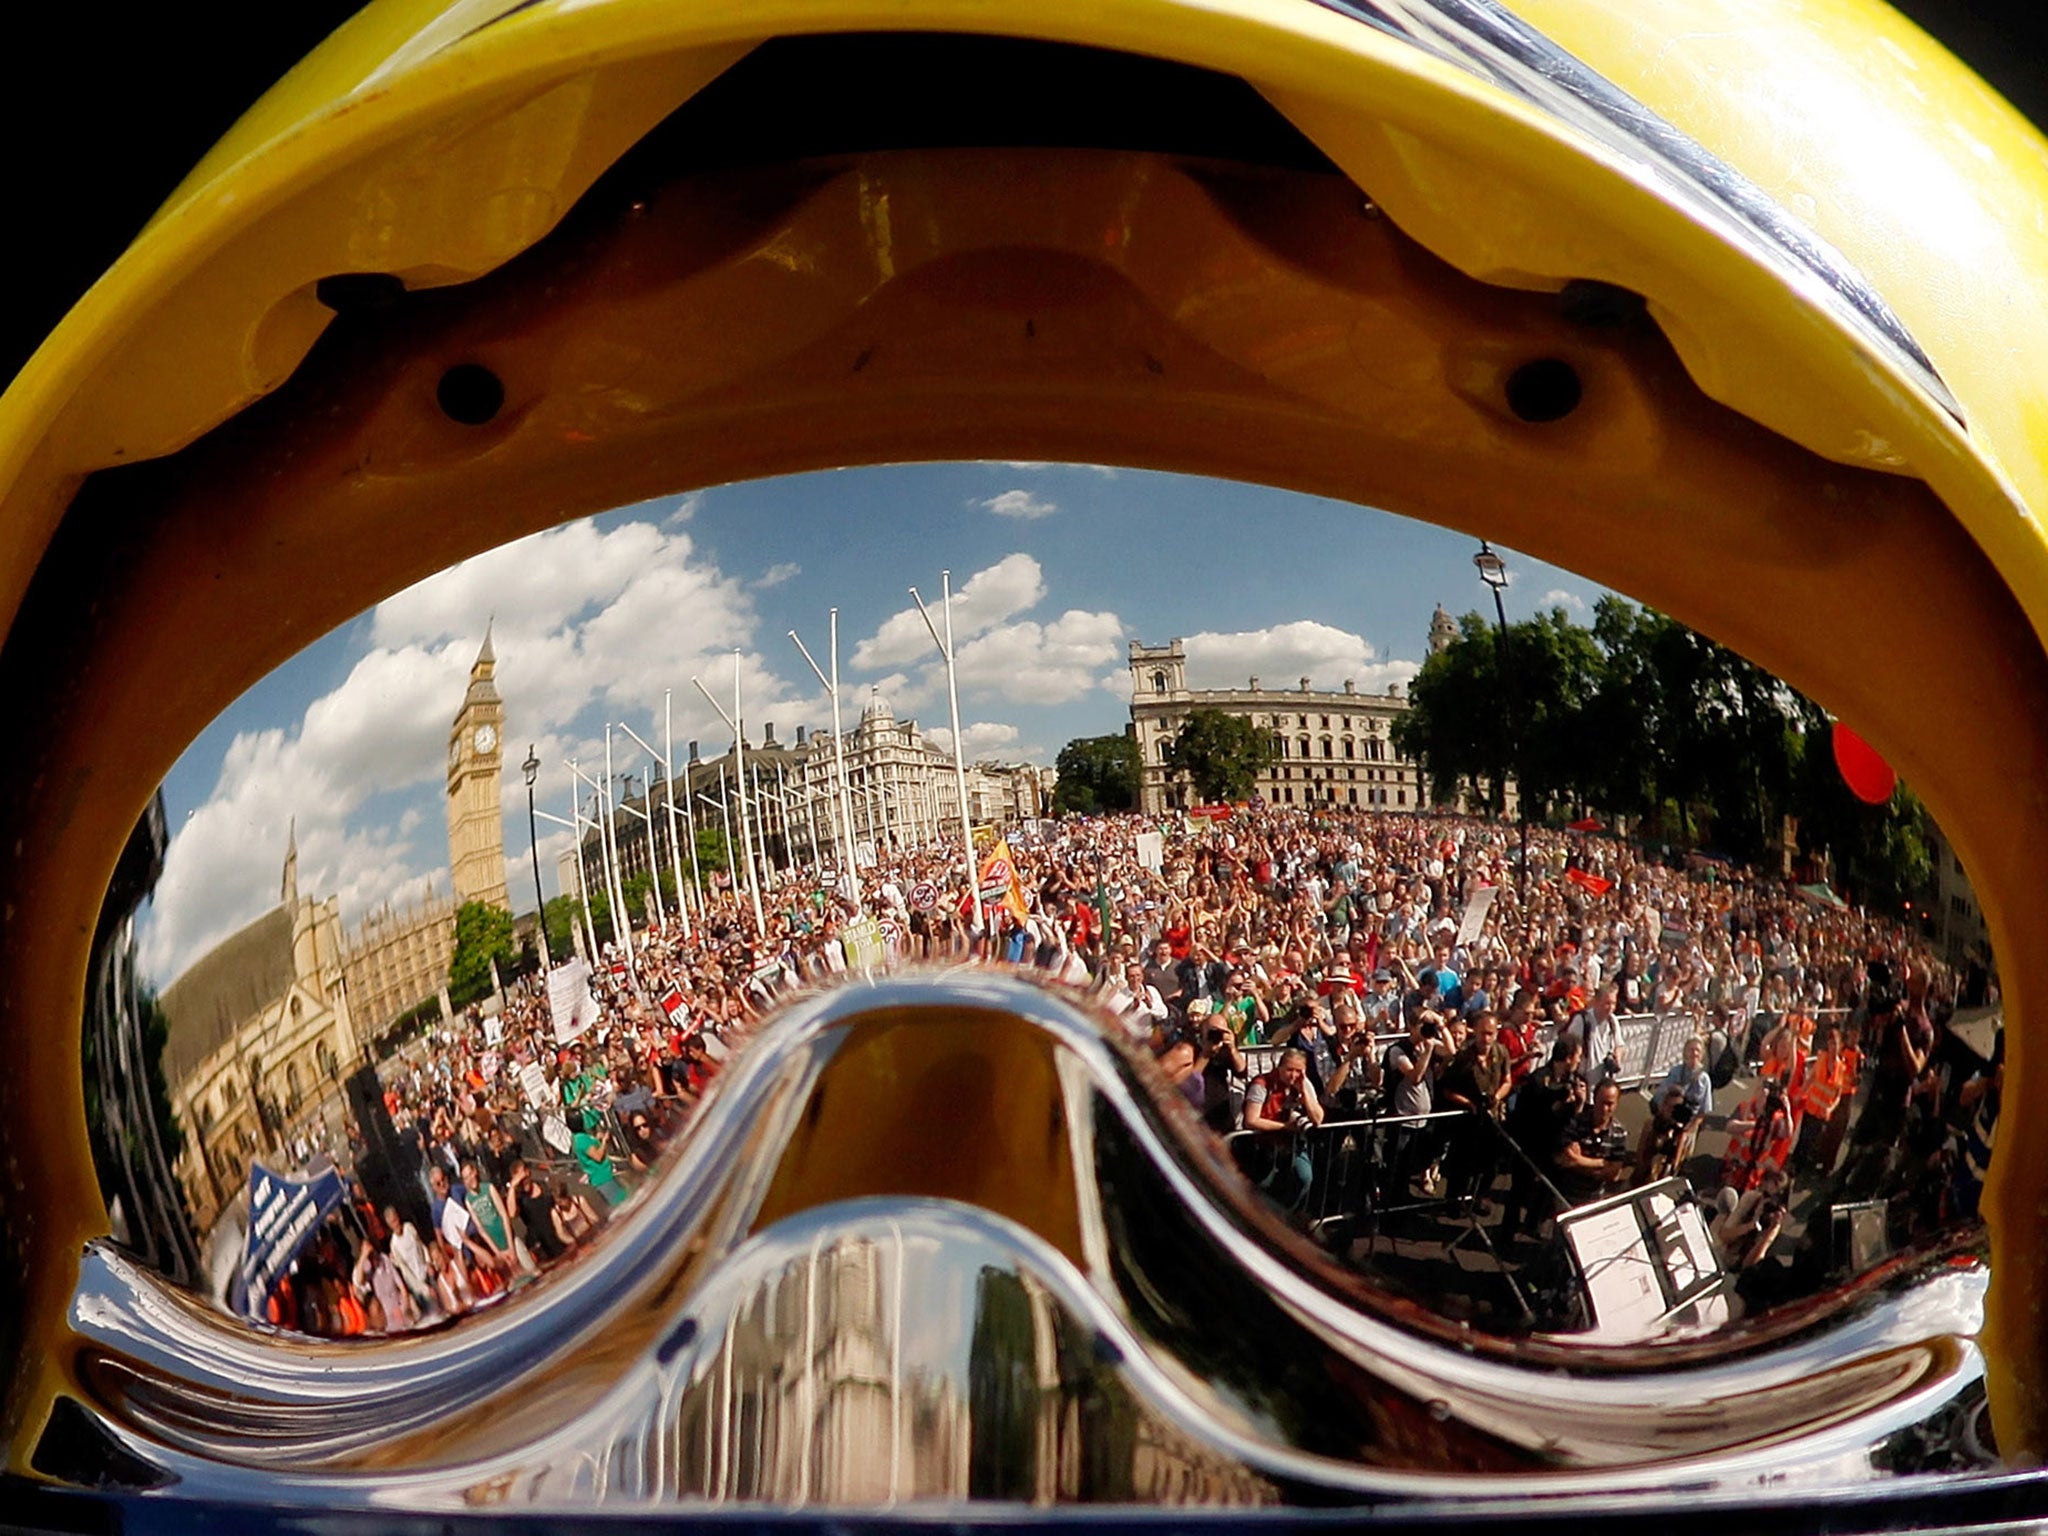 A crowd of thousands of demonstrators are reflected in a firefighter's helmet held up on stage in front of the gathering in Parliament Square in London. The crowd marched from Oxford Circus to Parliament Square to voice their opposition to government aust